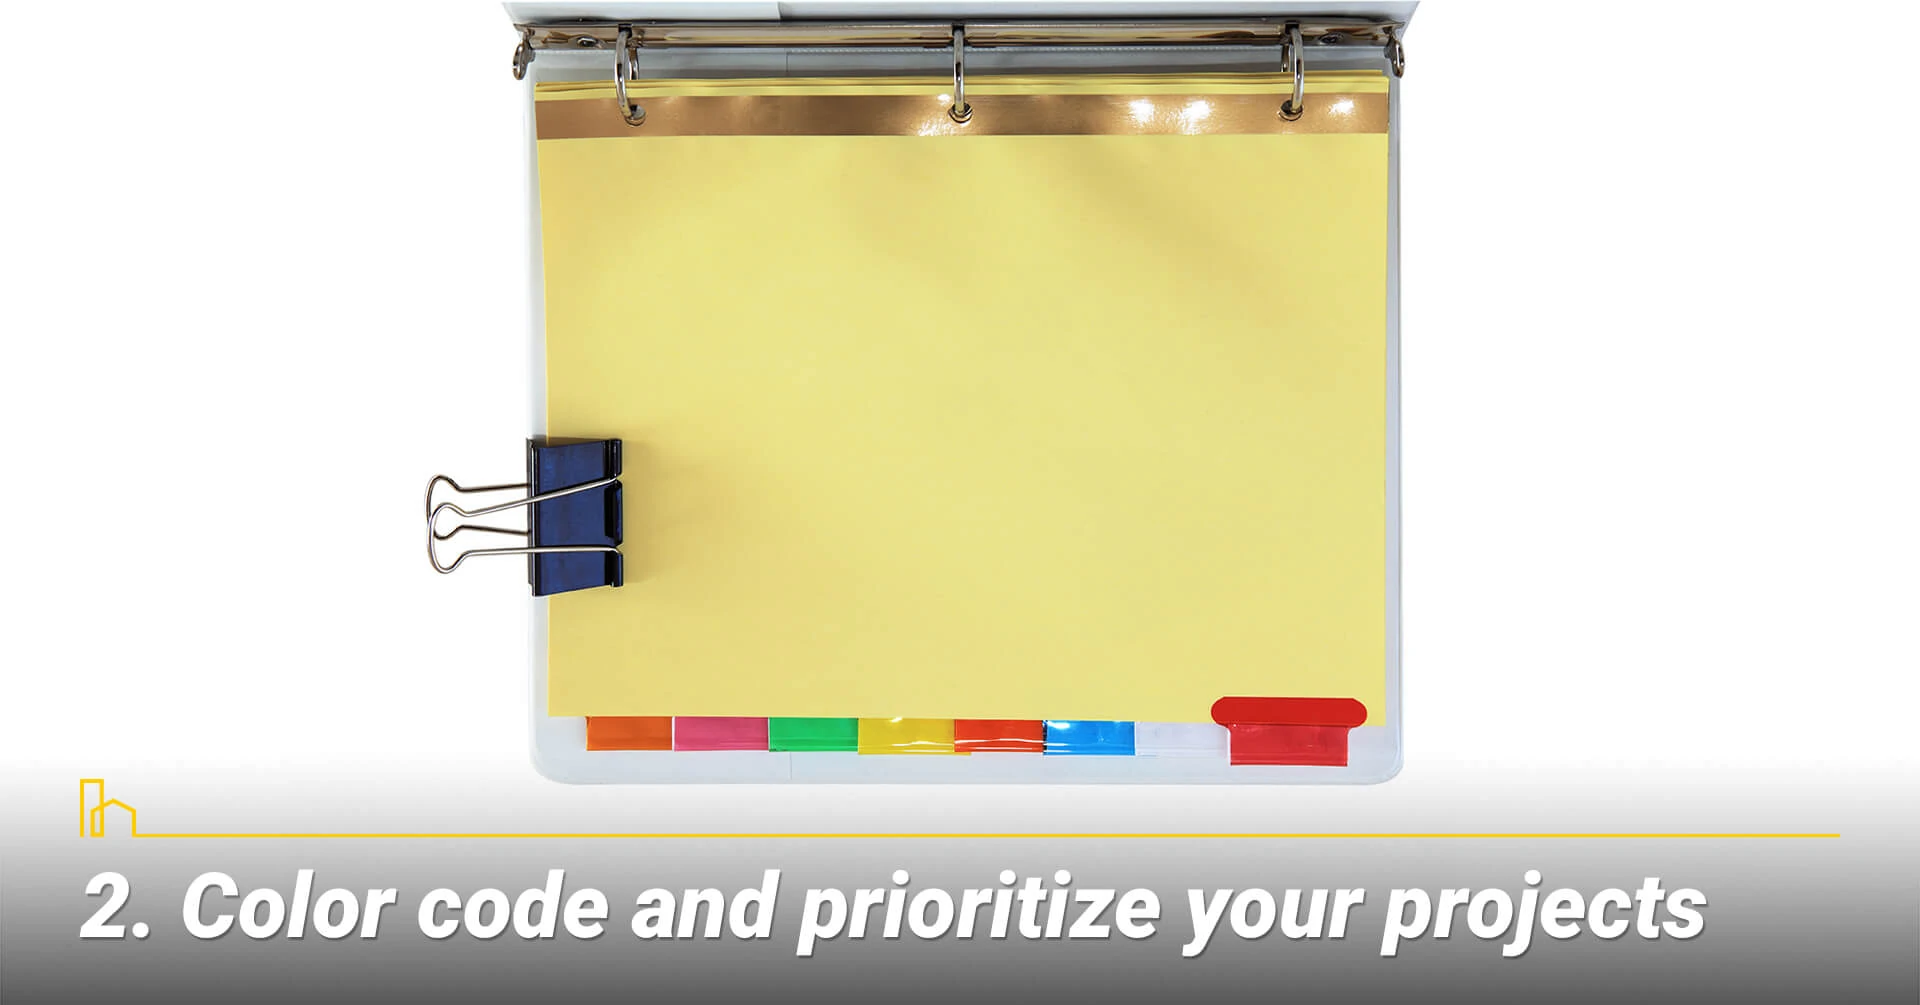 Color code and prioritize your projects, keep your projects organized